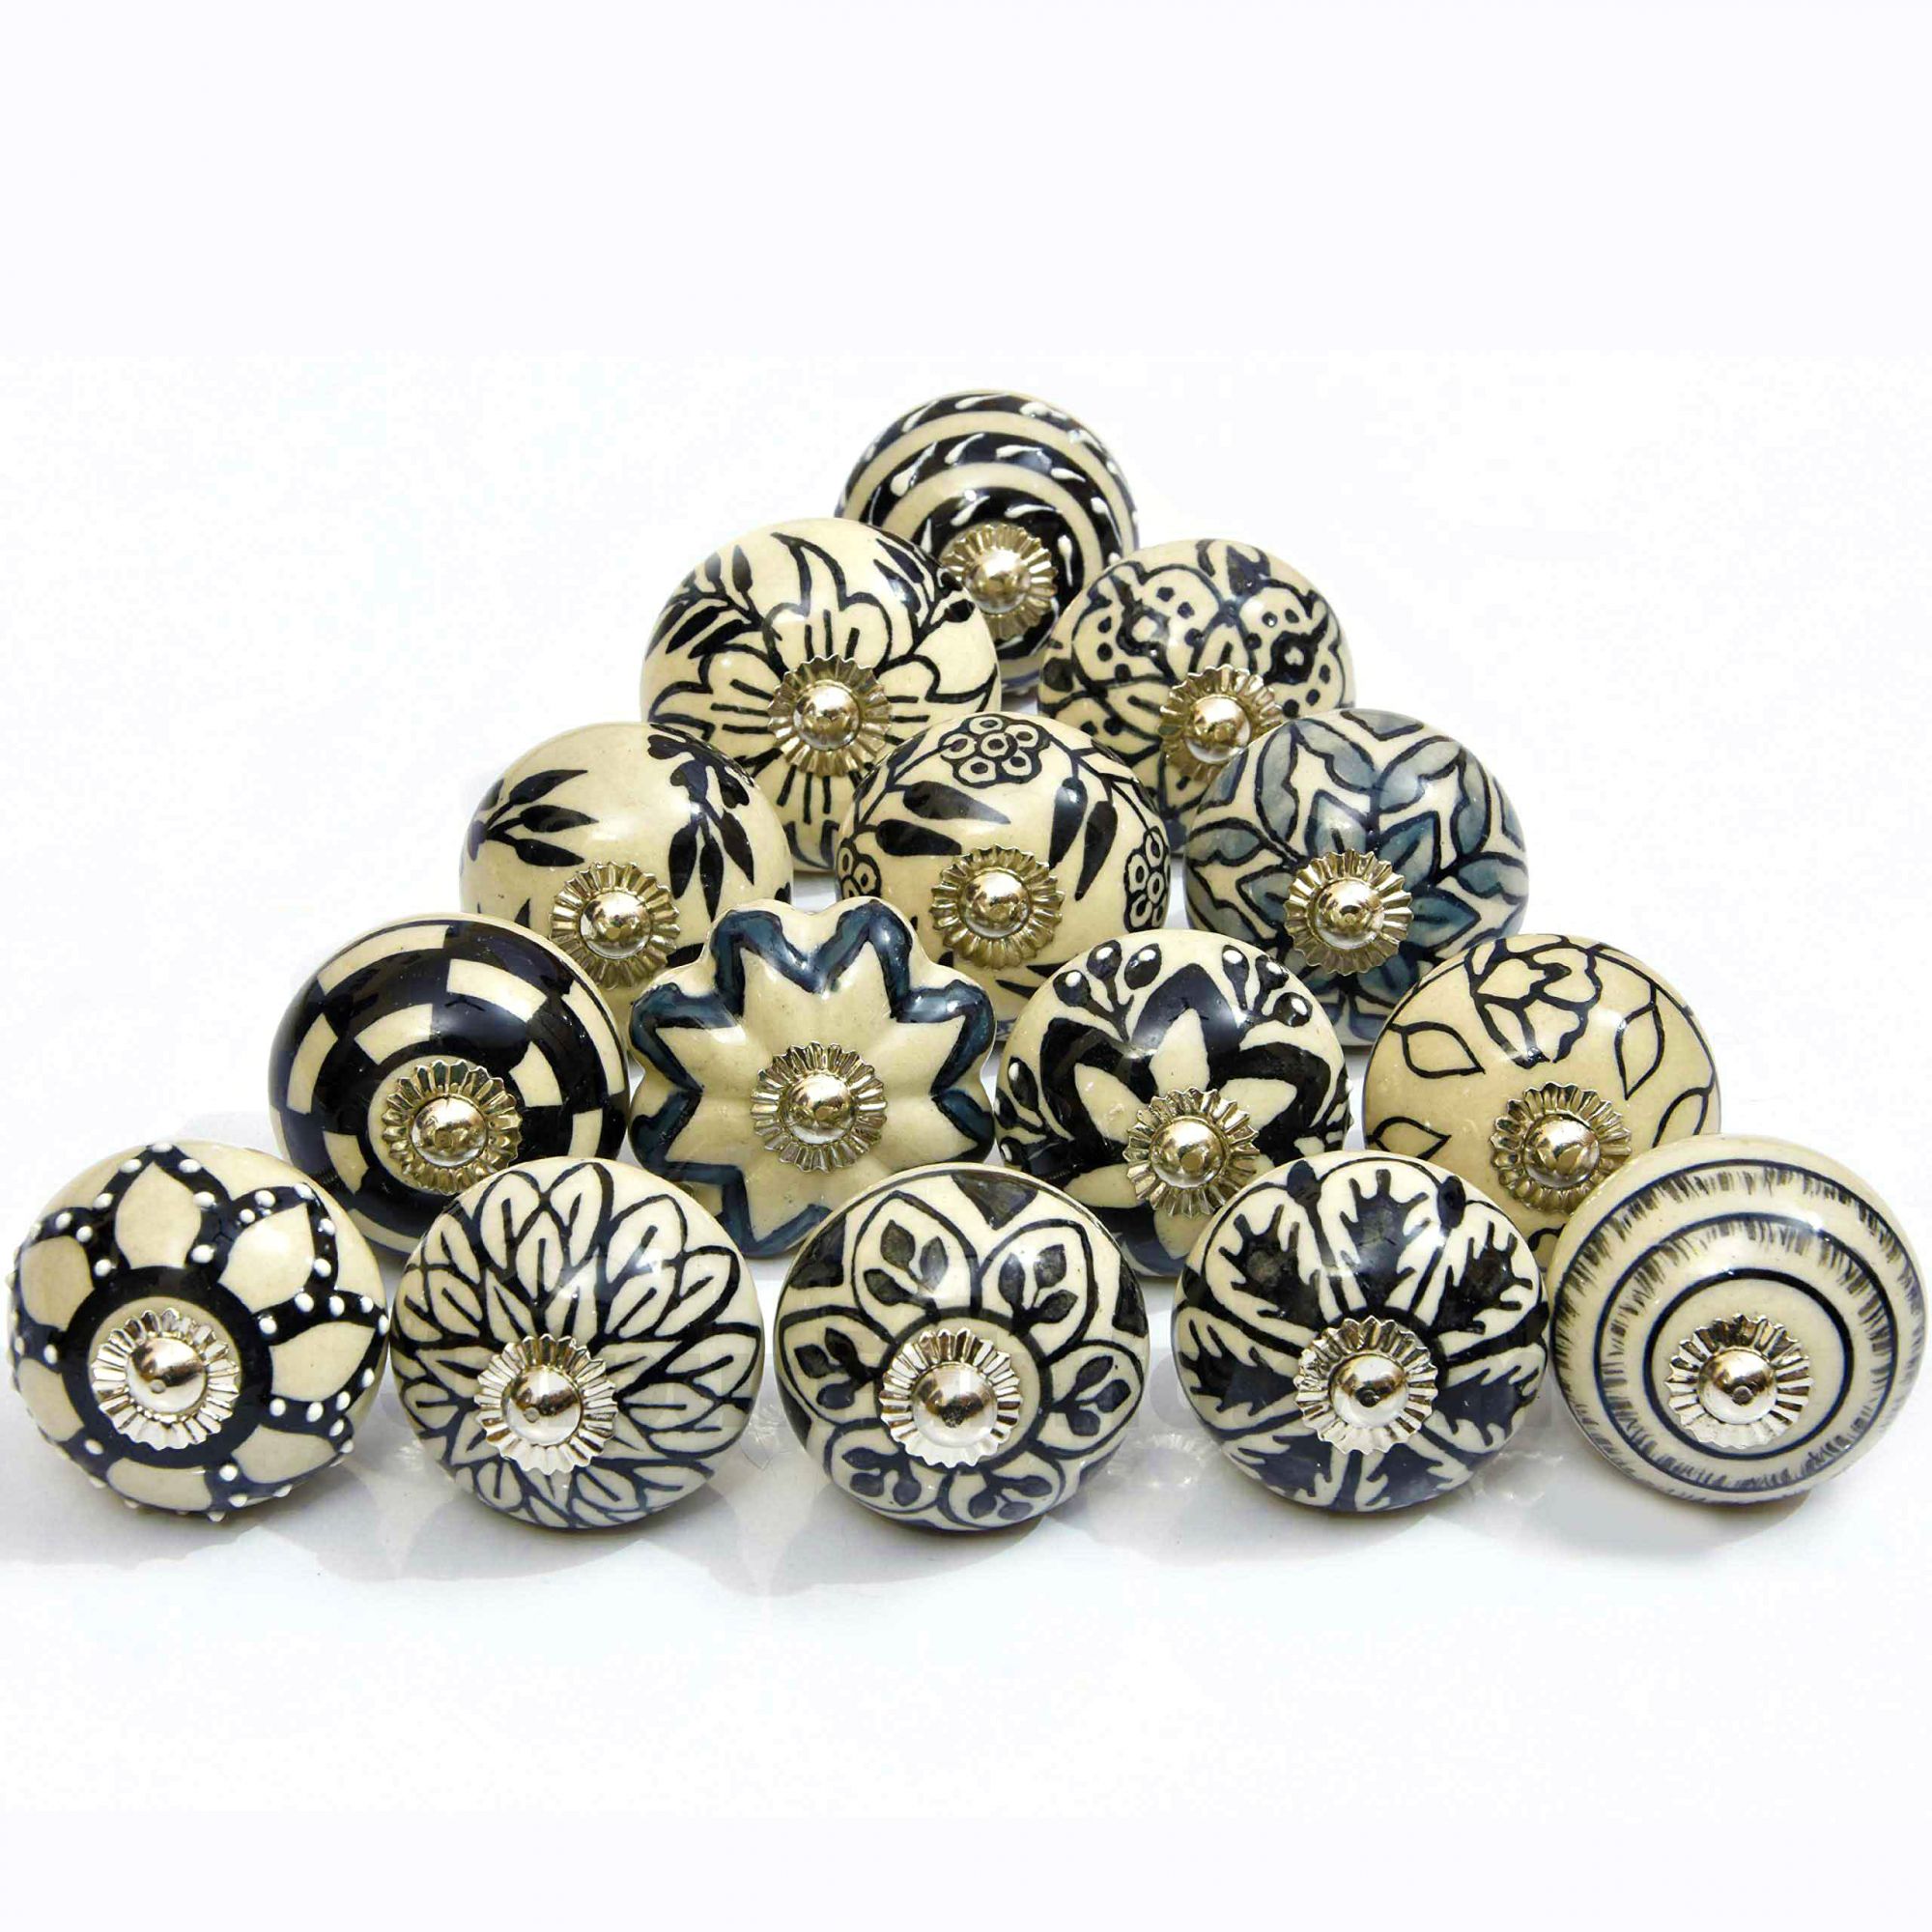 Black & White Set of 15 Pcs Fabricated Knobs for Doors and Cabinets with Brass Blue Pottery